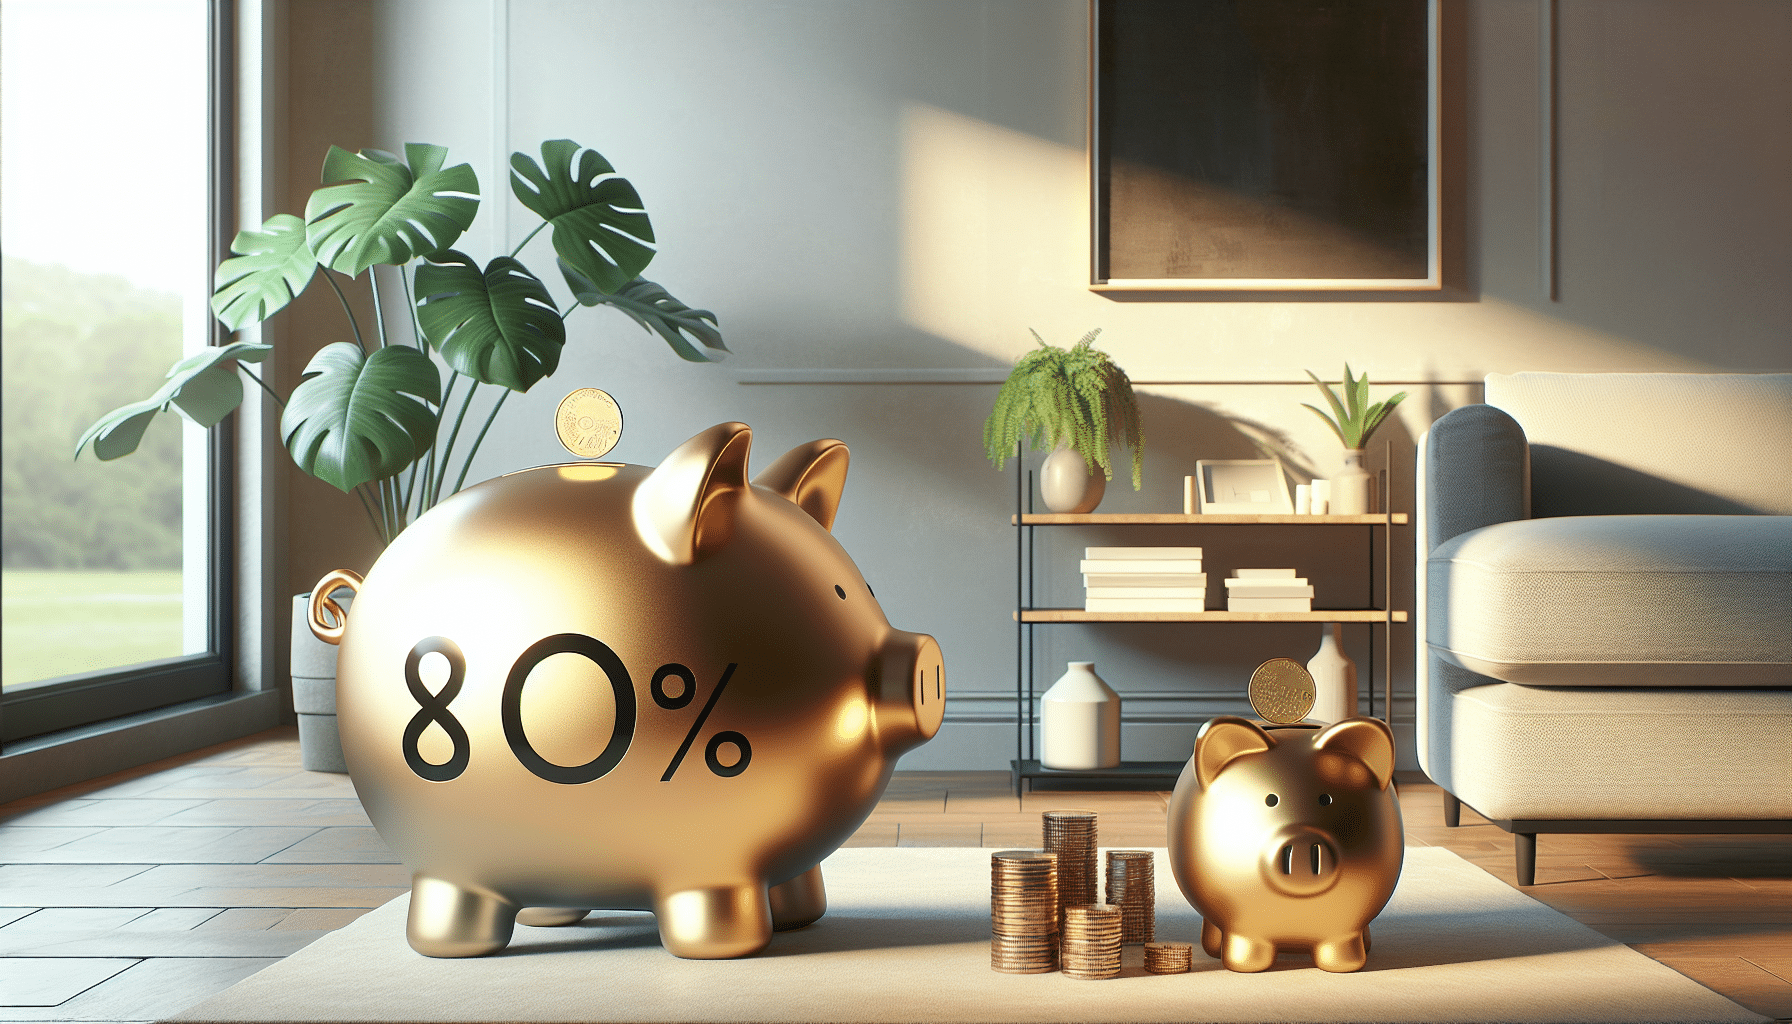 The 80/20 rule: A simplified budgeting method for prioritizing savings